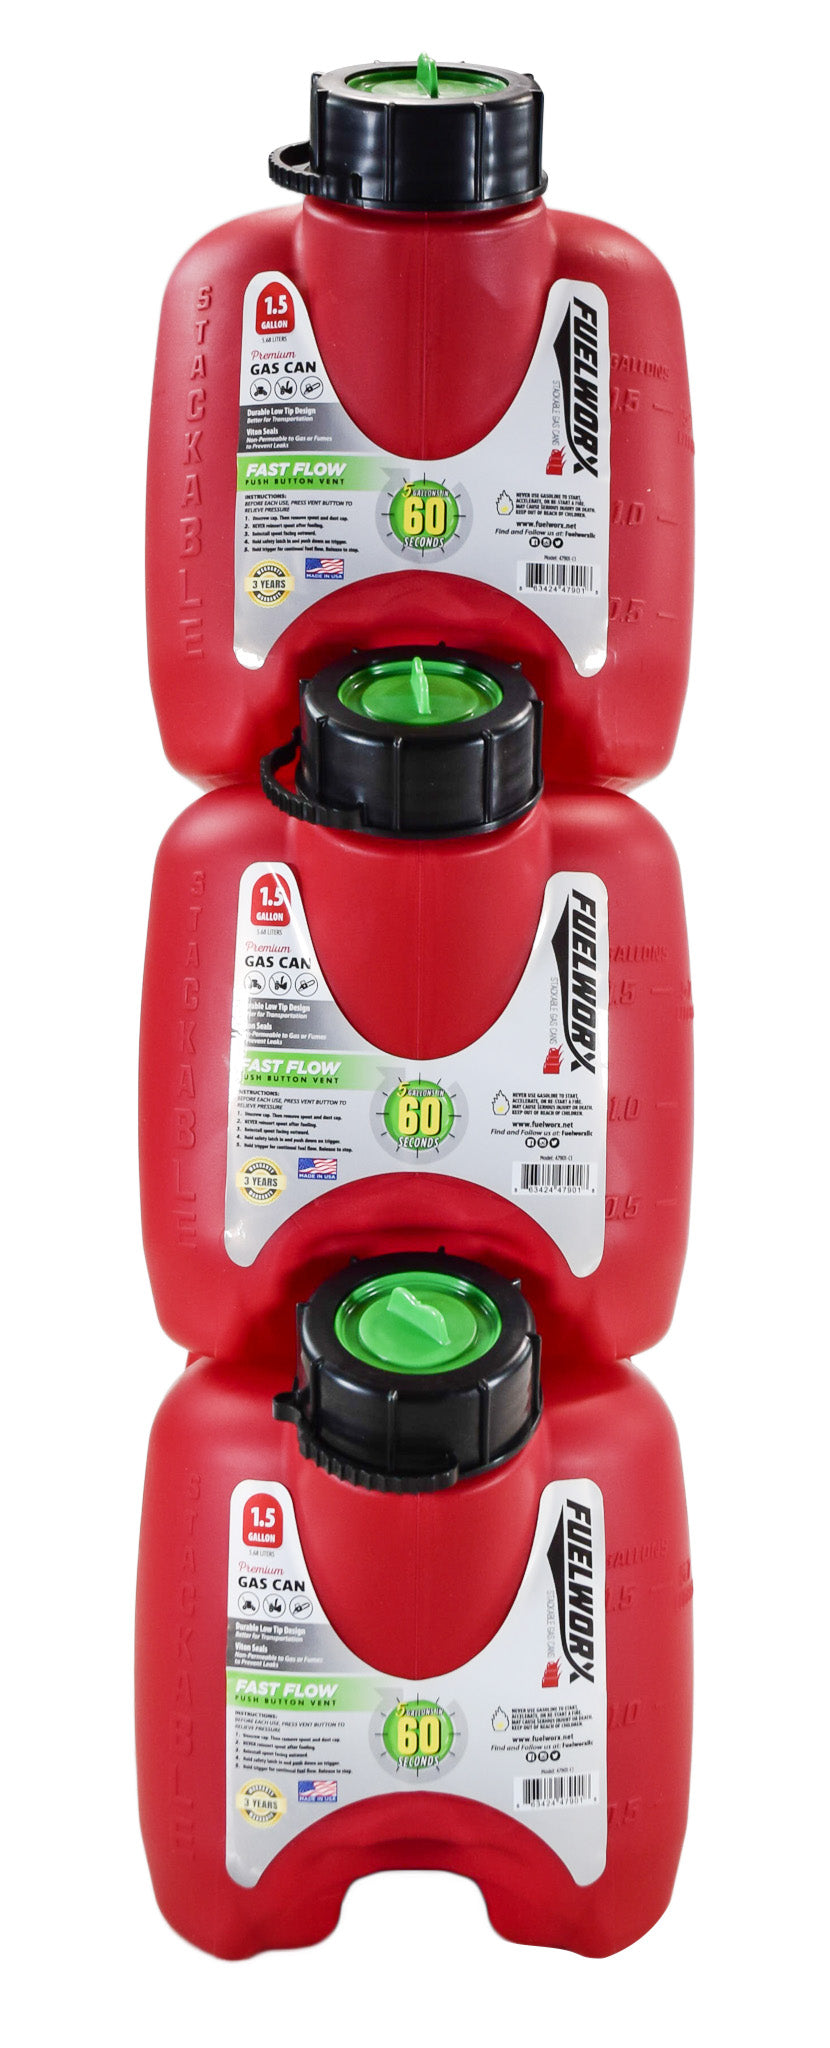 Fuelworx Red 1.5 Gallon Stackable Fast Pour Gas Fuel Cans CARB Compliant Made in The USA (1.5 Gallon Gas Can 3-Pack)